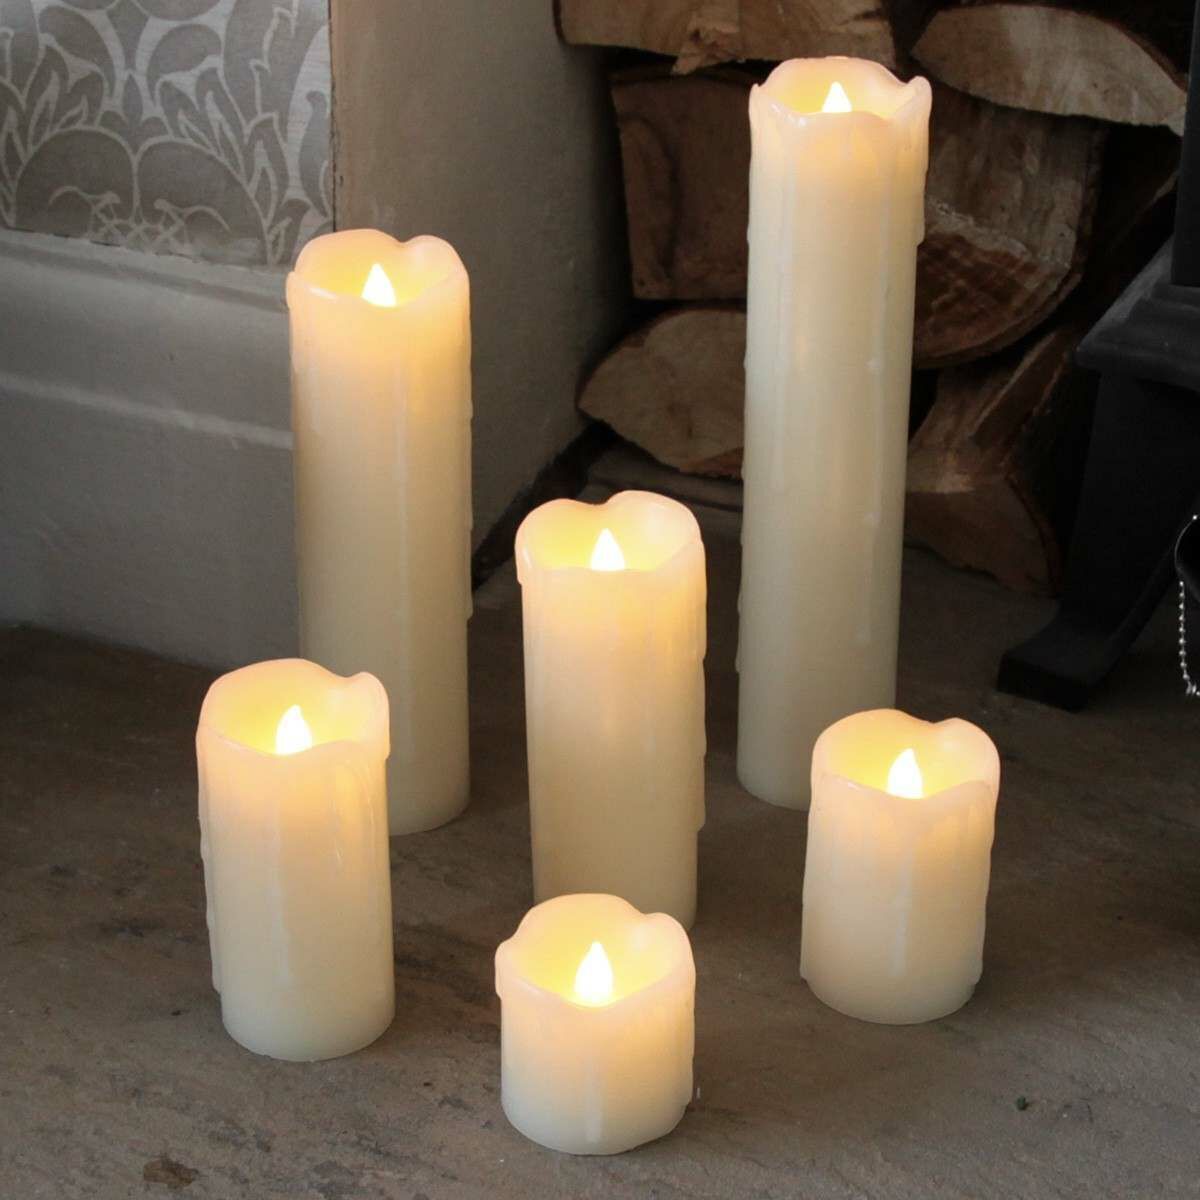 6 Battery Flickering Dripping Wax Pillar LED Candles image 1